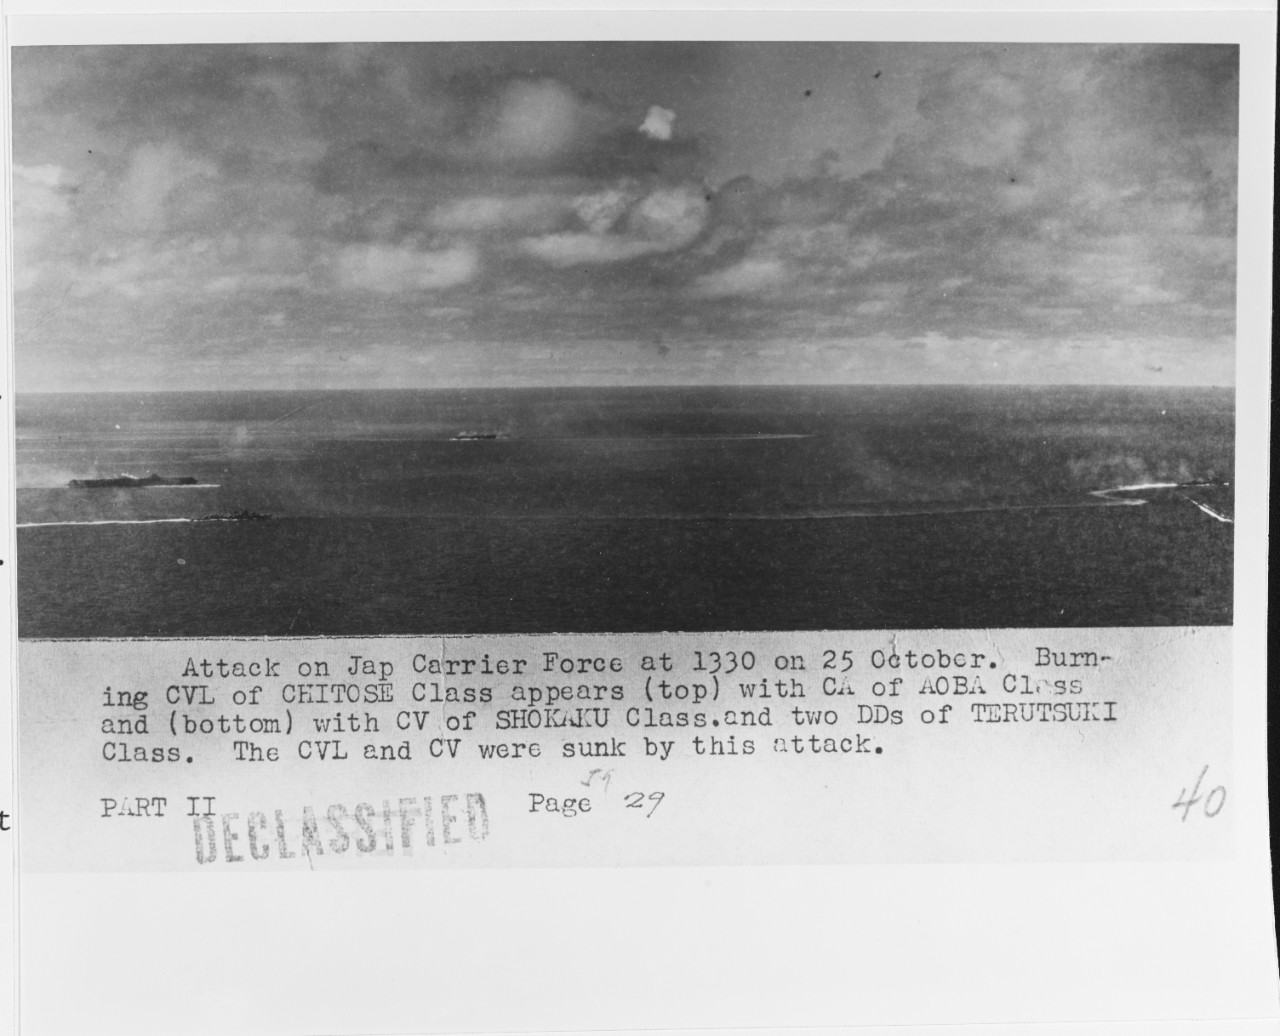 Photo #: NH 95542  Battle off Cape Engano, 25 October 1944